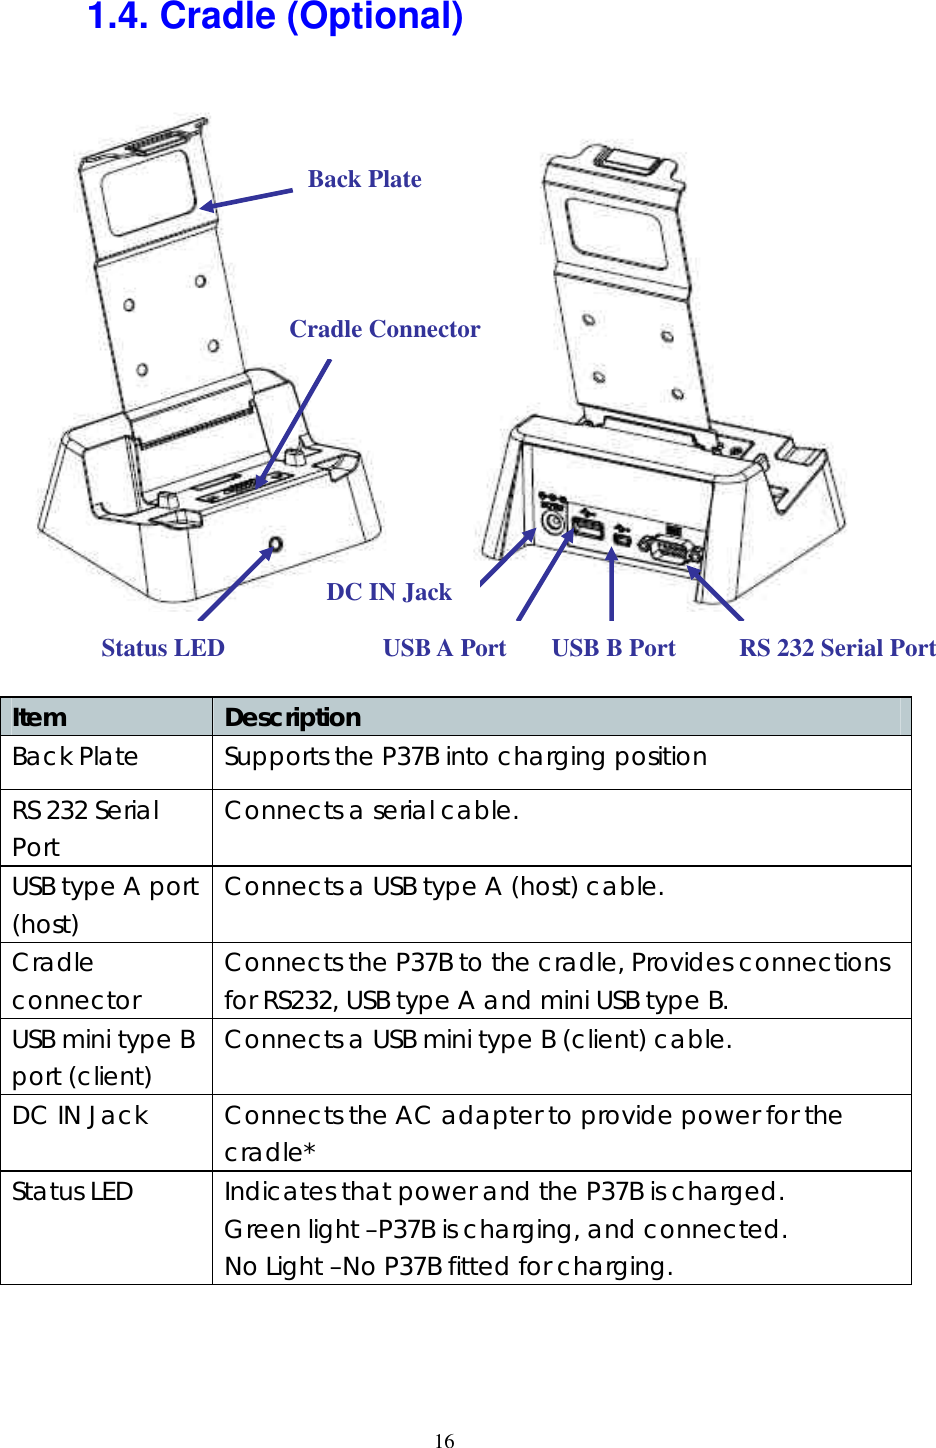  16 1.4. Cradle (Optional)          Item  Description   Back Plate Supports the P37B into charging position RS 232 Serial Port Connects a serial cable. USB type A port (host) Connects a USB type A (host) cable.    Cradle connector Connects the P37B to the cradle, Provides connections for RS232, USB type A and mini USB type B. USB mini type B port (client) Connects a USB mini type B (client) cable. DC IN Jack Connects the AC adapter to provide power for the cradle* Status LED Indicates that power and the P37B is charged.  Green light –P37B is charging, and connected. No Light –No P37B fitted for charging.    Cradle Connector Status LED DC IN Jack USB A Port USB B Port RS 232 Serial Port Back Plate 